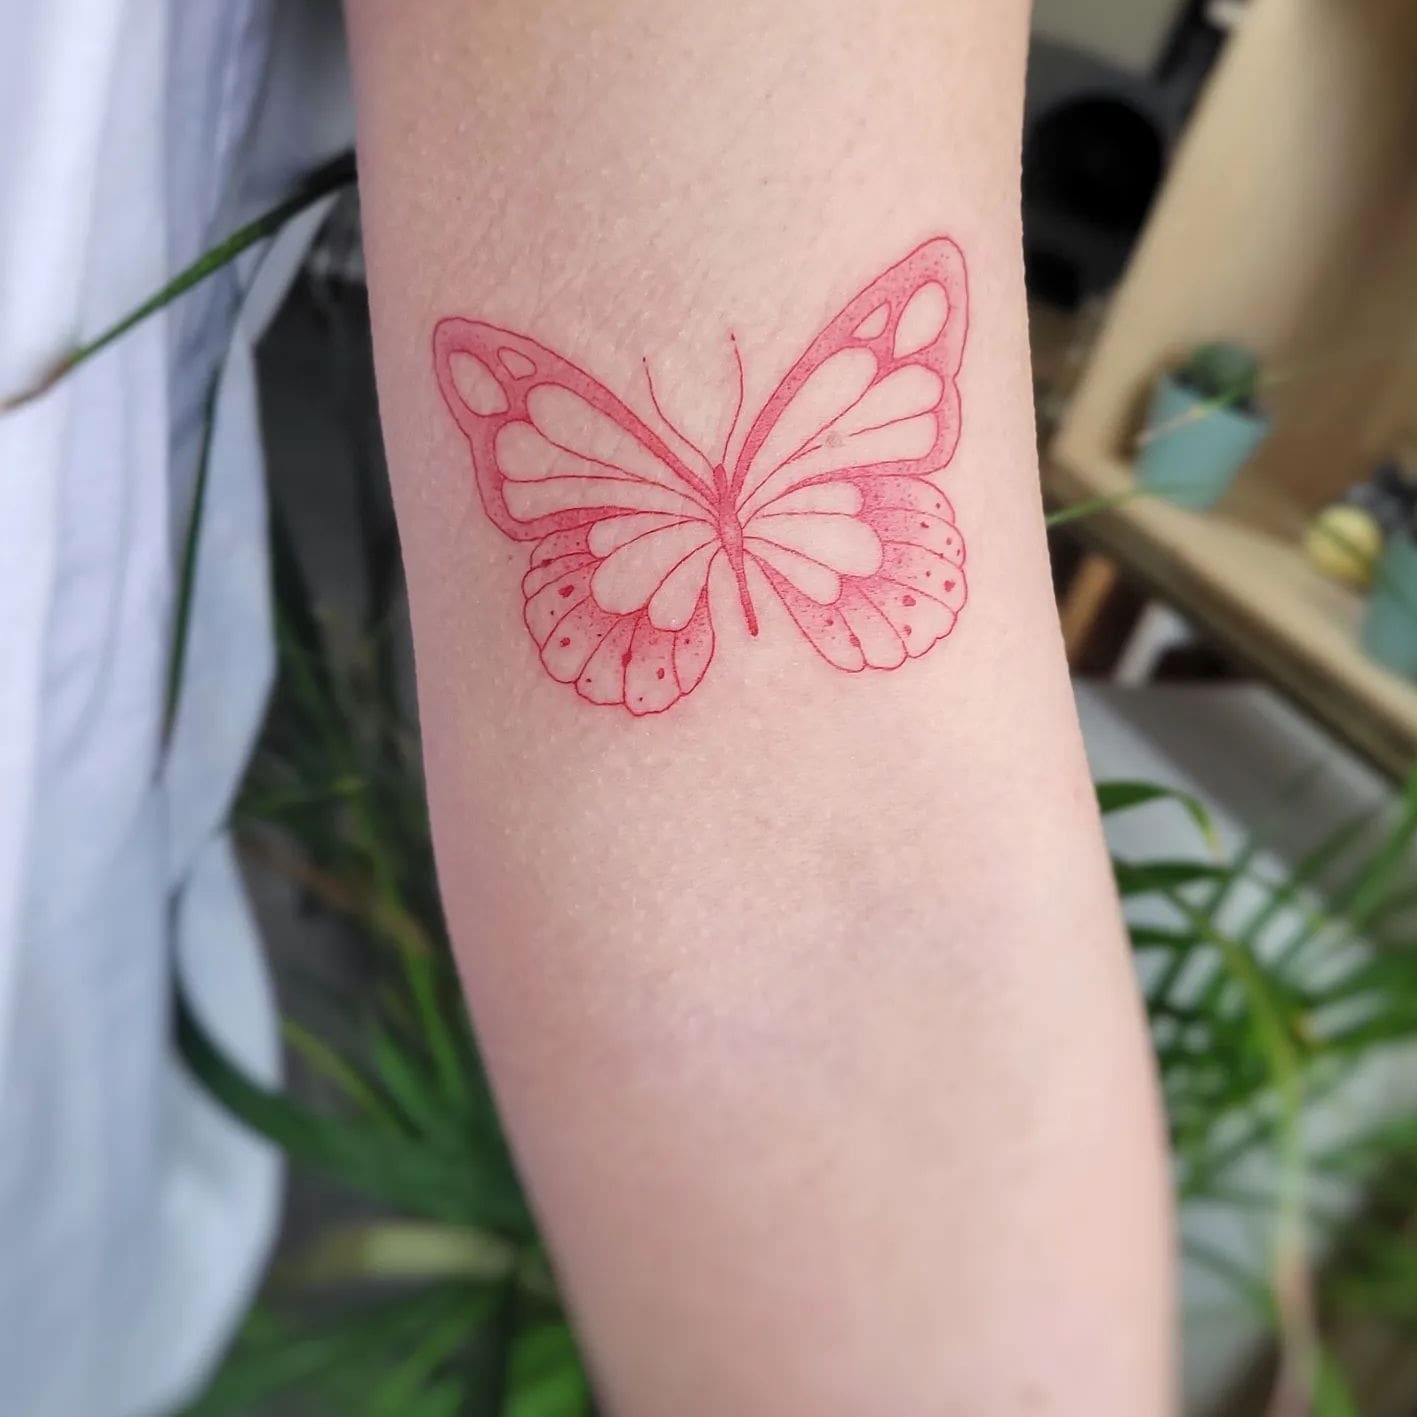 Red butterfly tattoo on forearm